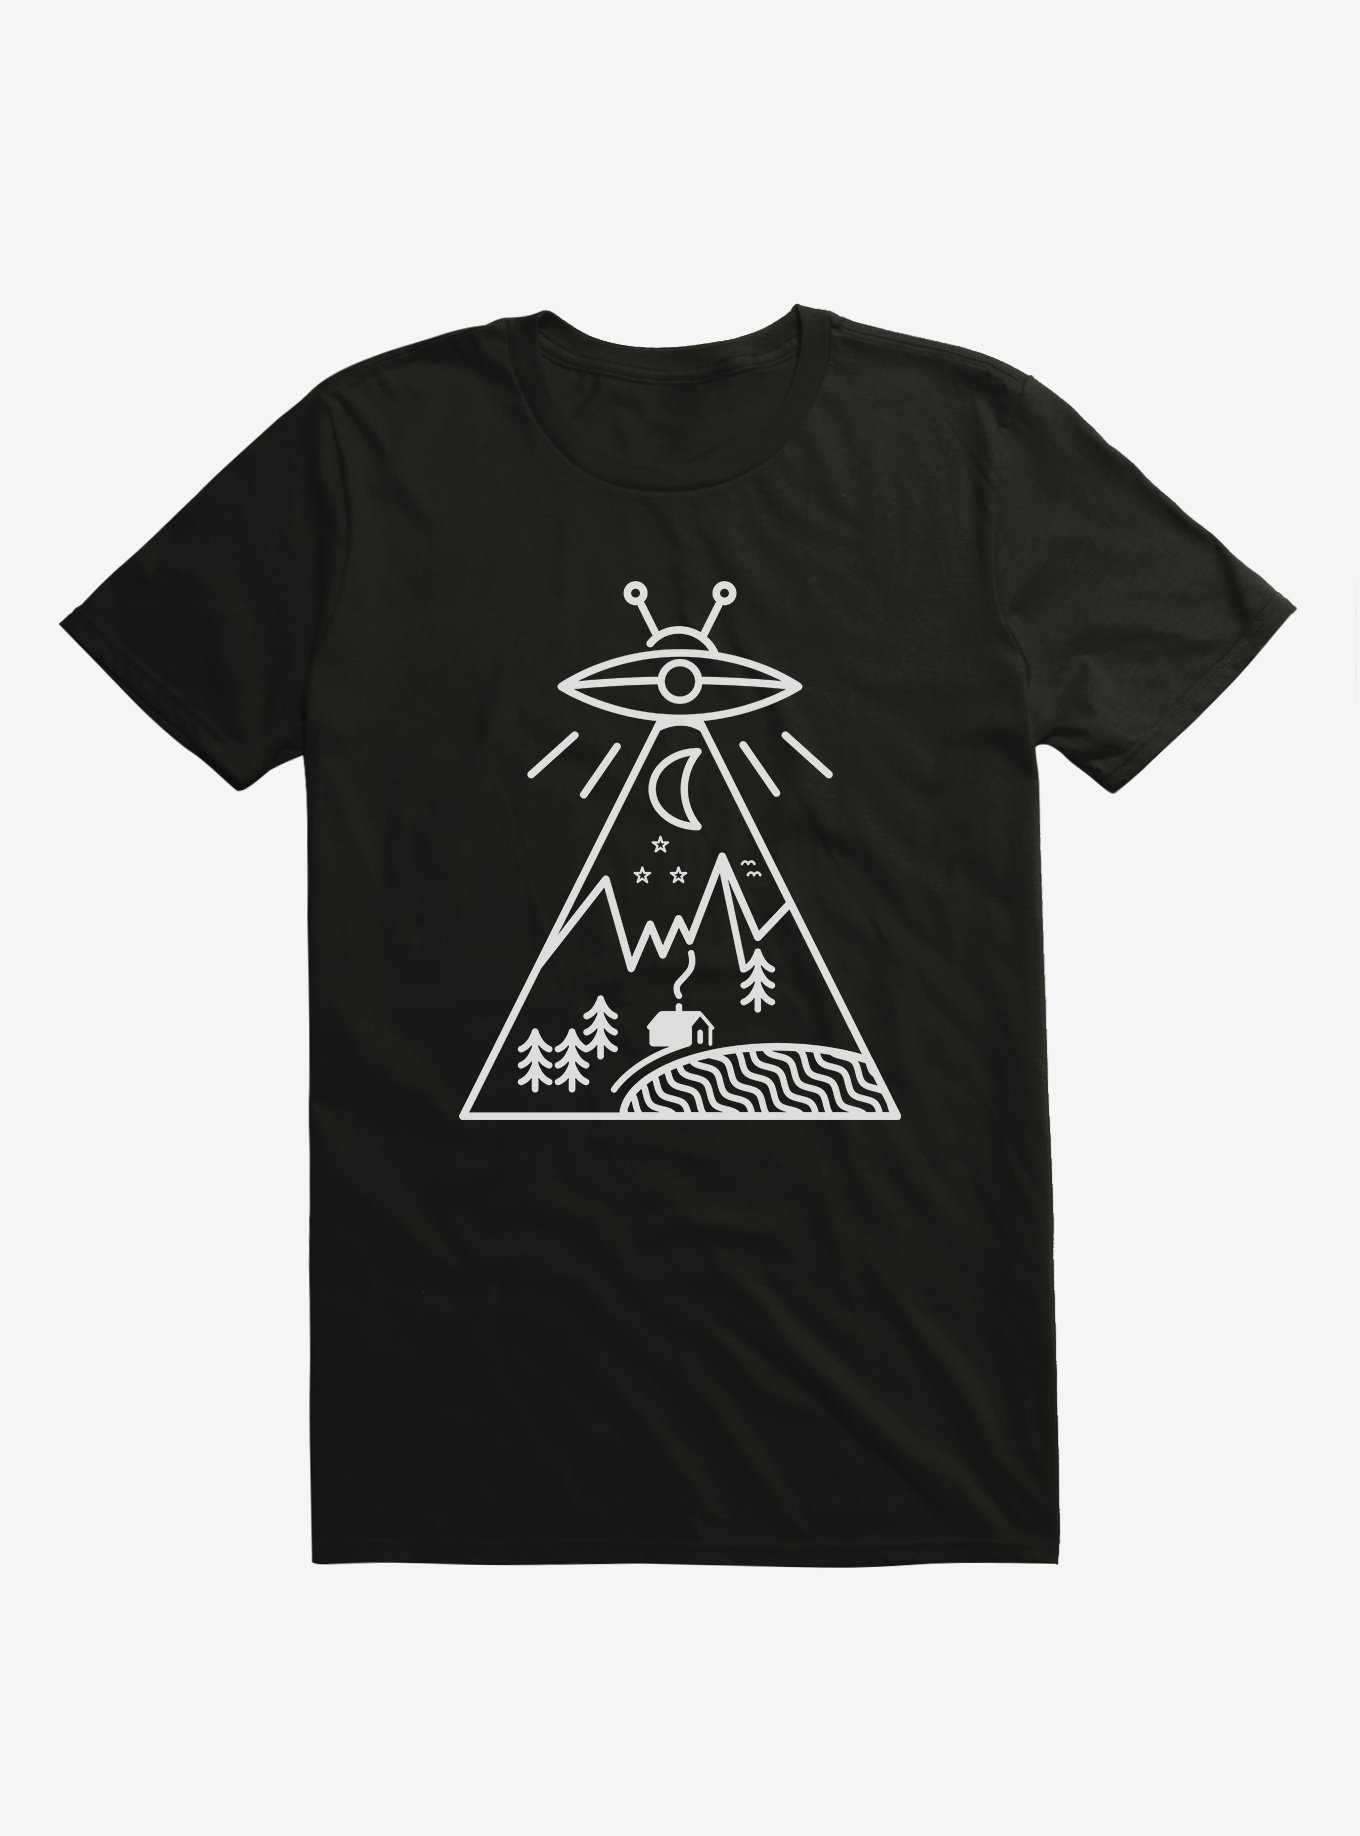 They Made Us Alien Black T-Shirt, , hi-res